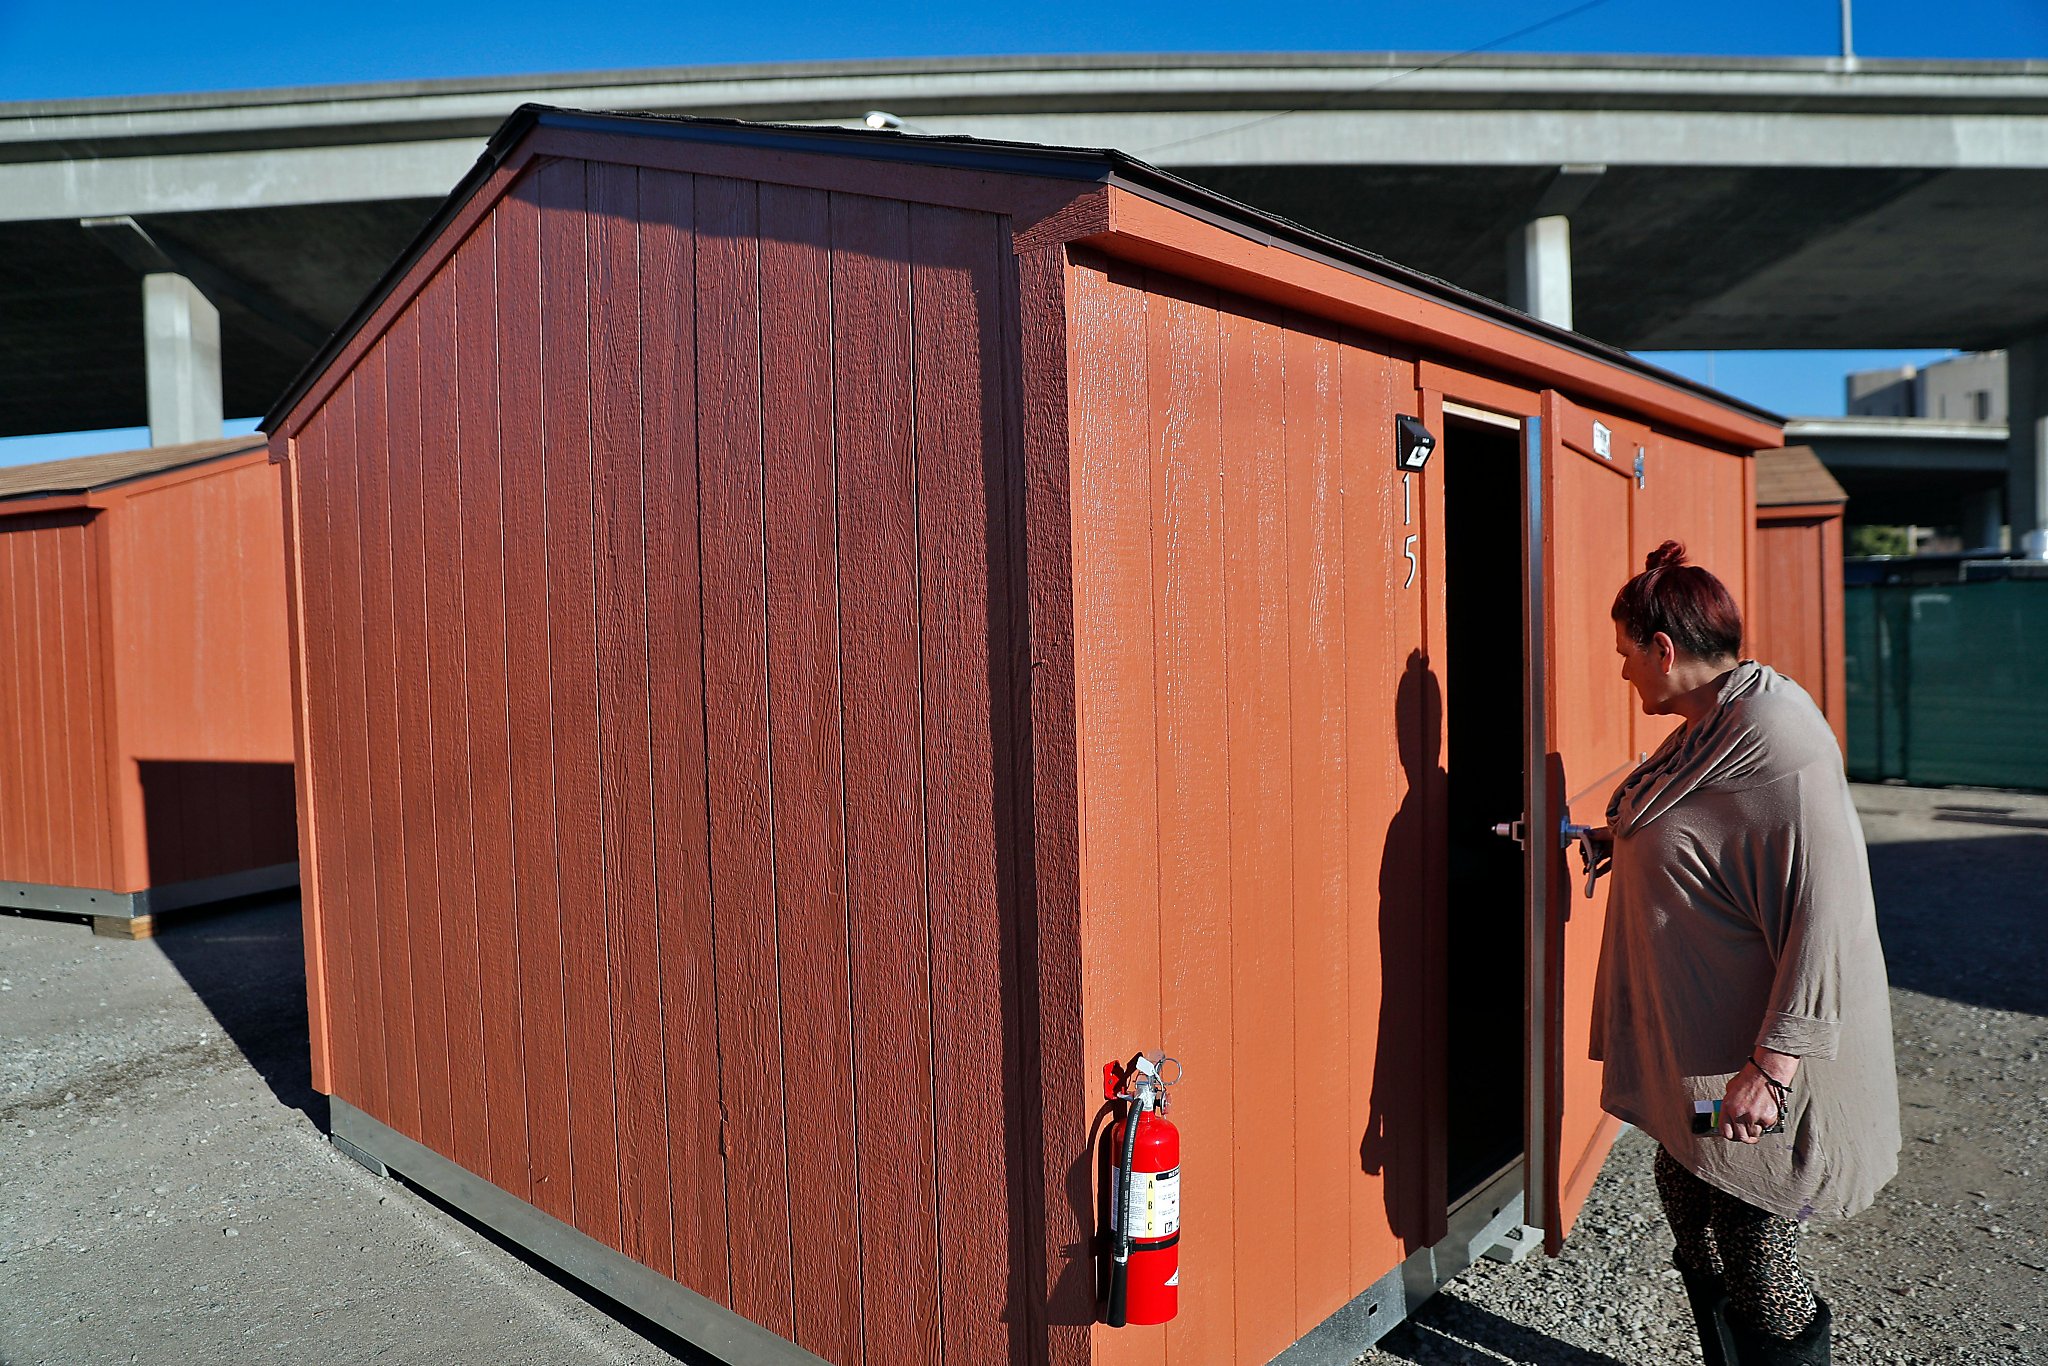 Sheds for homeless in Oakland are proving to be a useful 